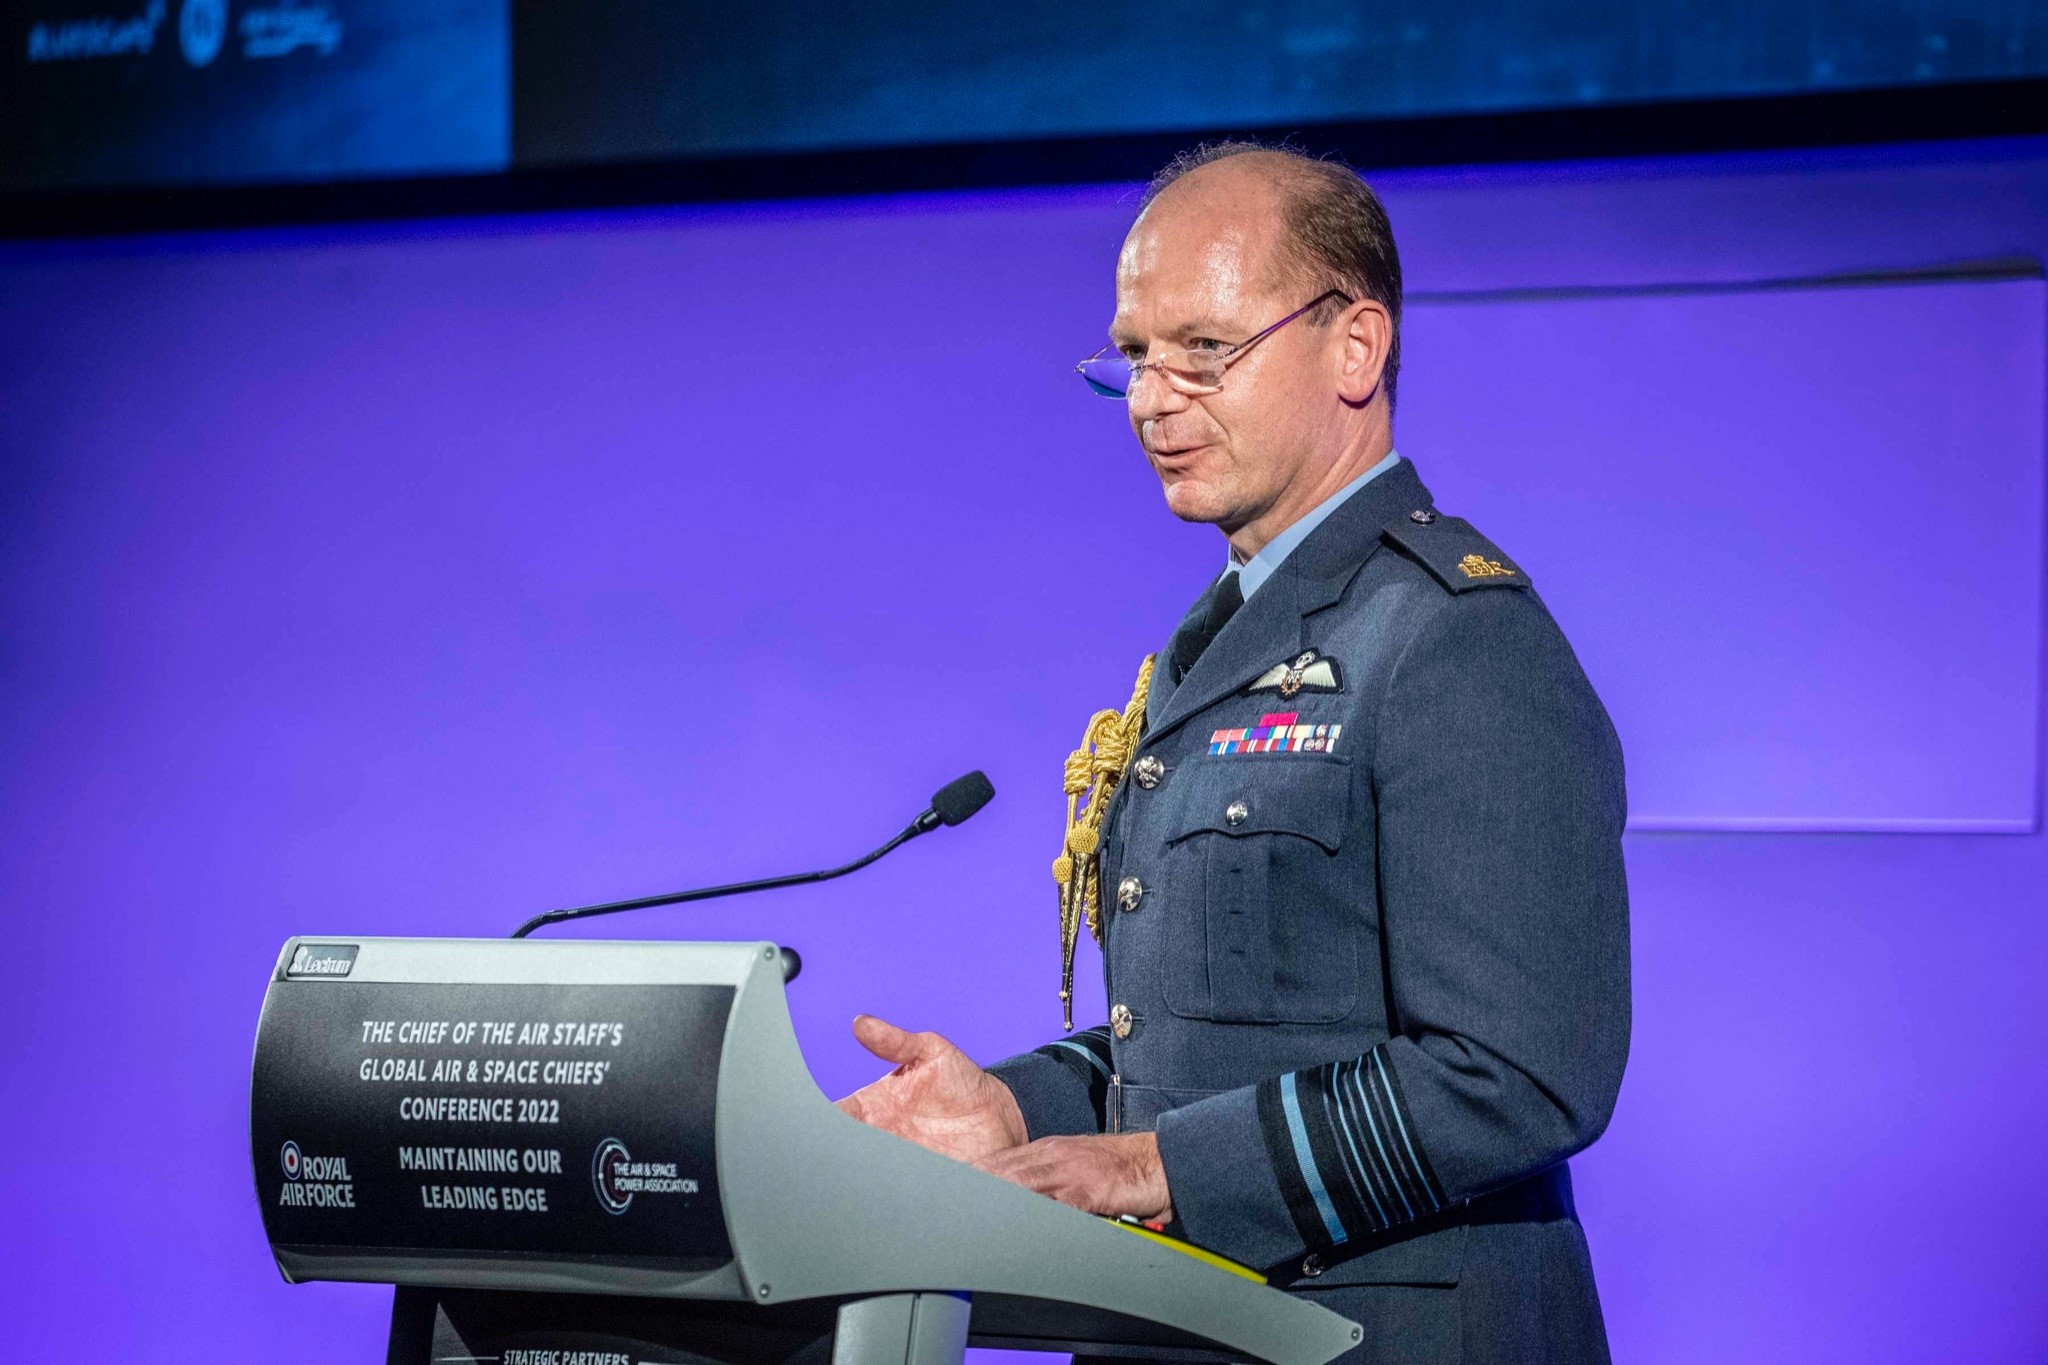 Image shows the Chief of the Air Staff giving speech at podium.